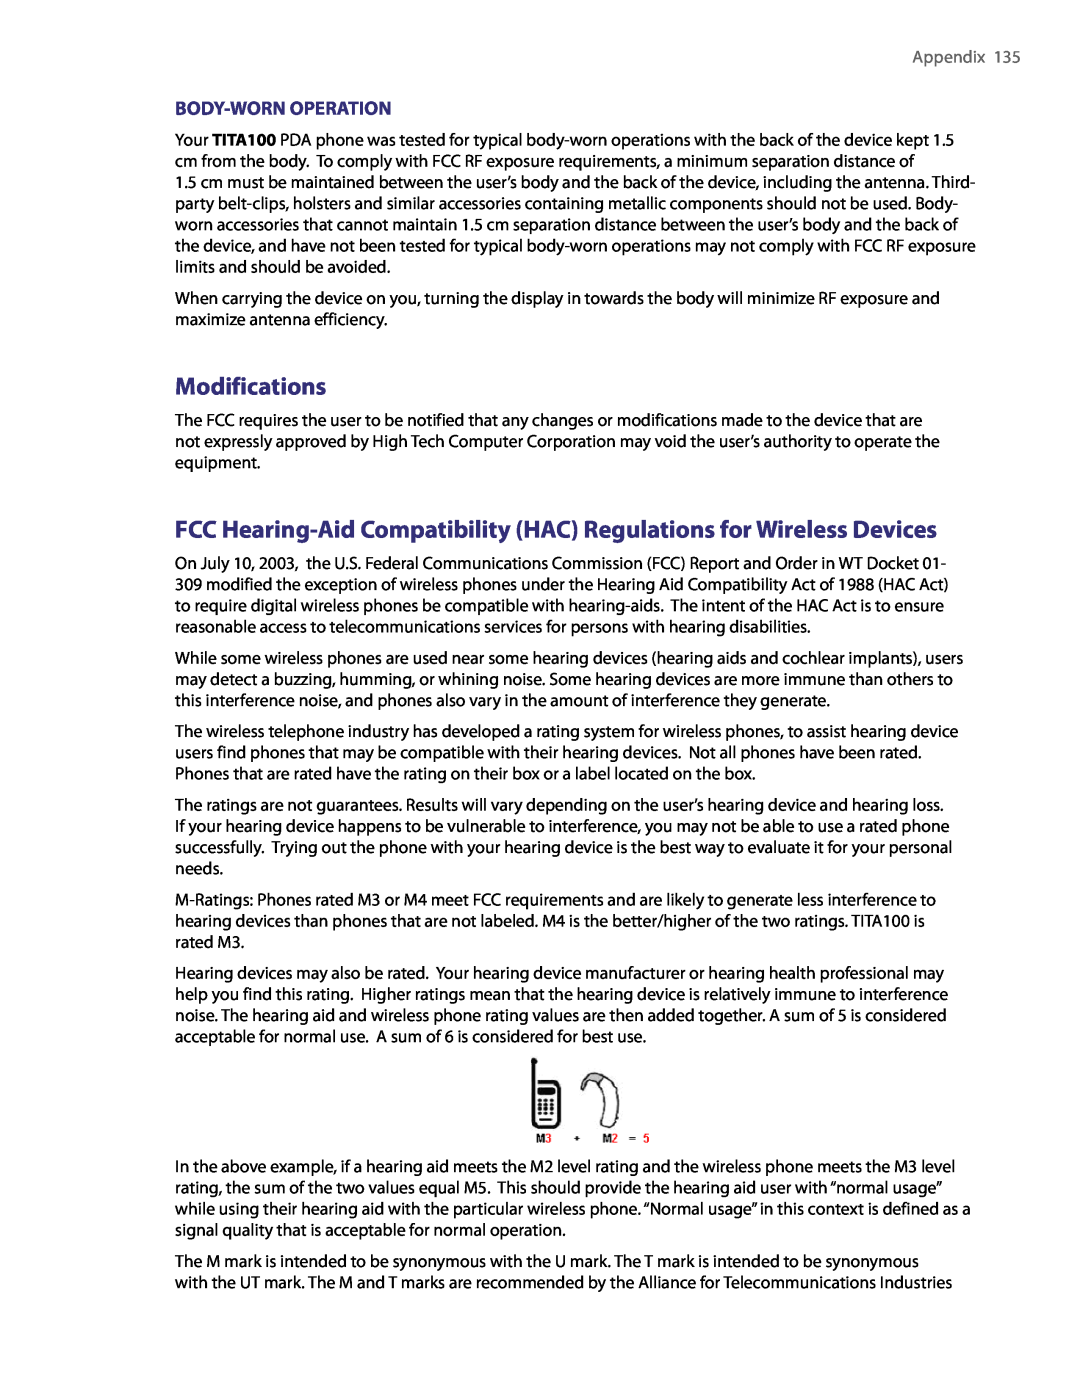 HTC PDA Phone Modifications, FCC Hearing-Aid Compatibility HAC Regulations for Wireless Devices, Body-Worn Operation 